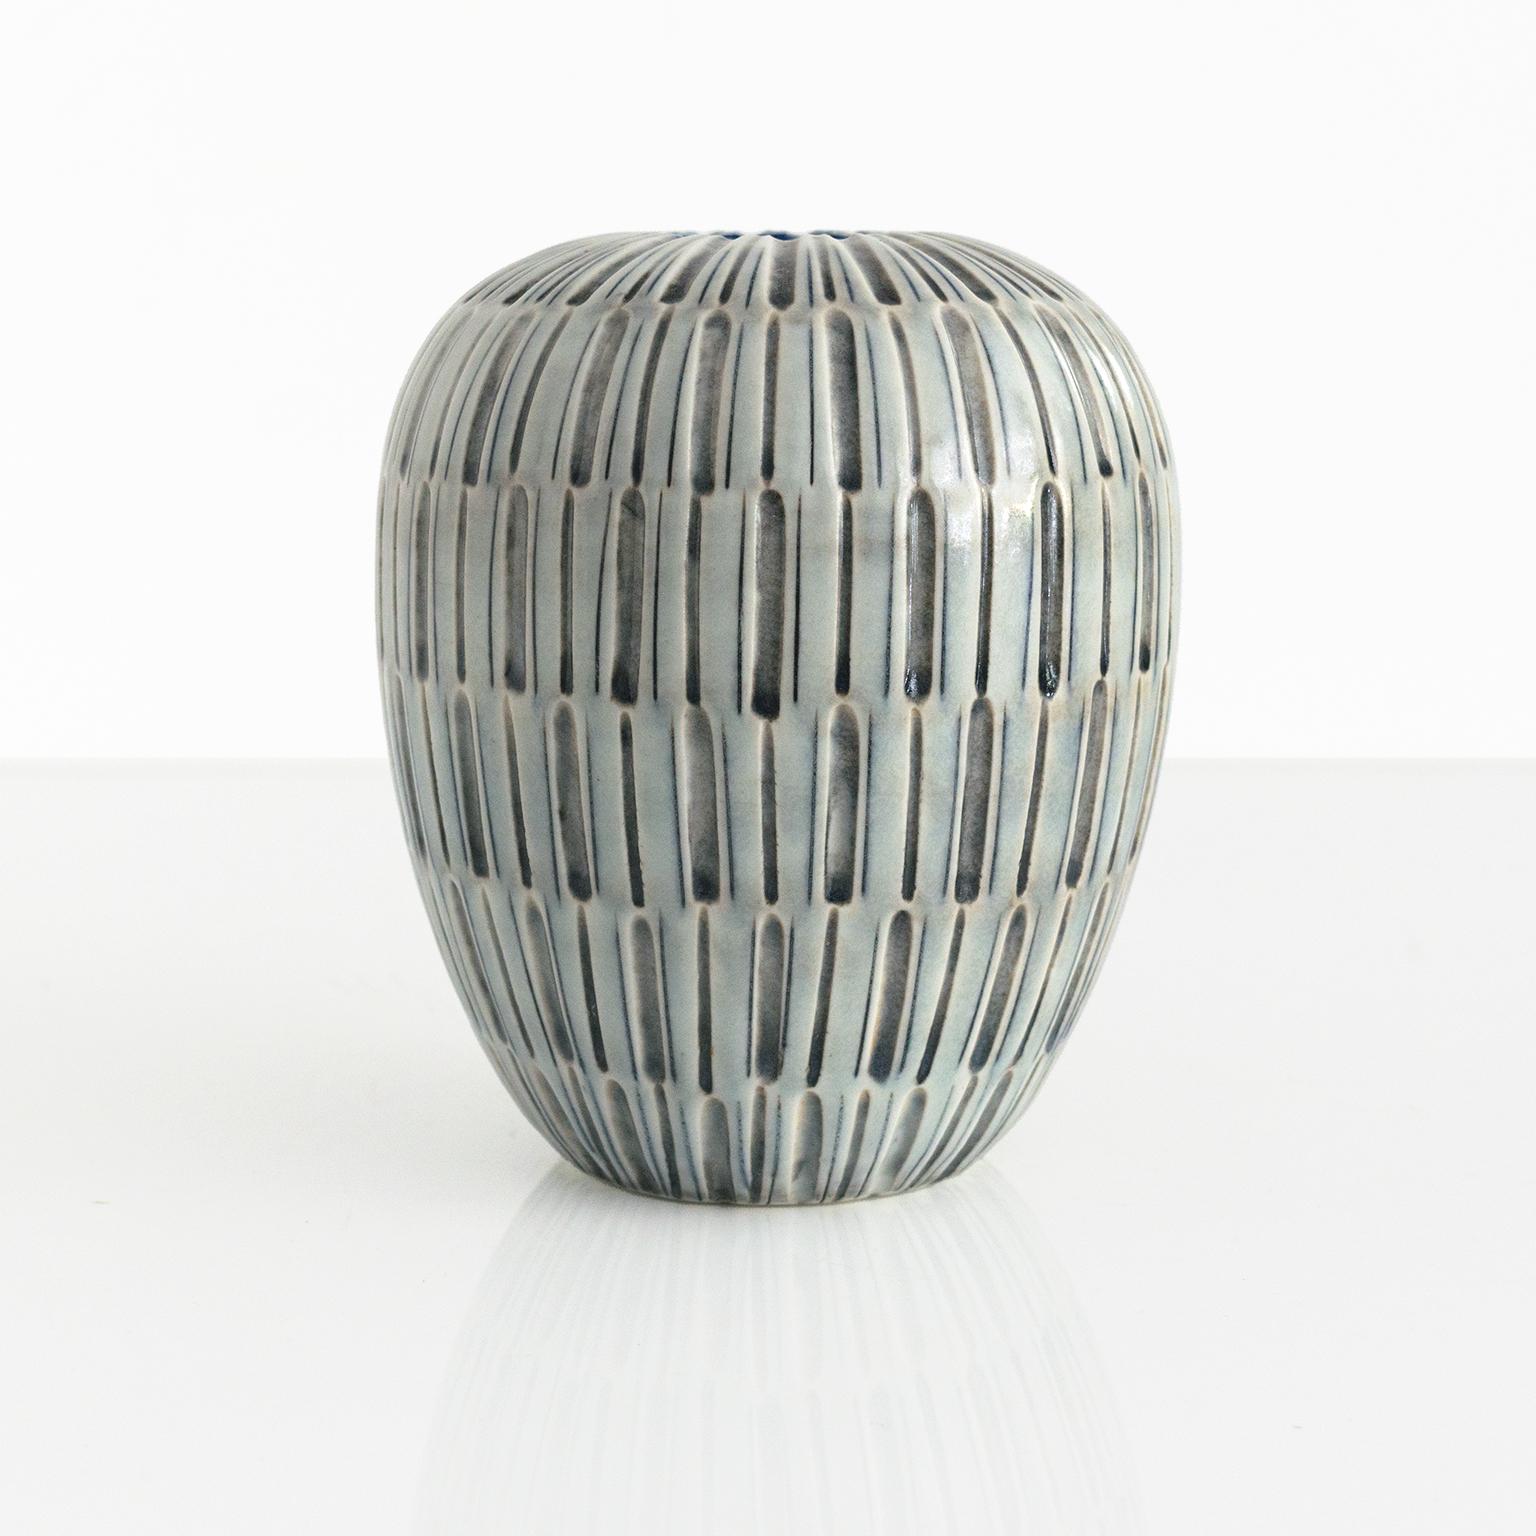 Gertrud Lonegren textured vase with bands of vertical patterns in neutral blue and gray. This studio pieces was created at Rorstrand between 1937-42

Measures: Height: 6.25“ Diameter: 5“.